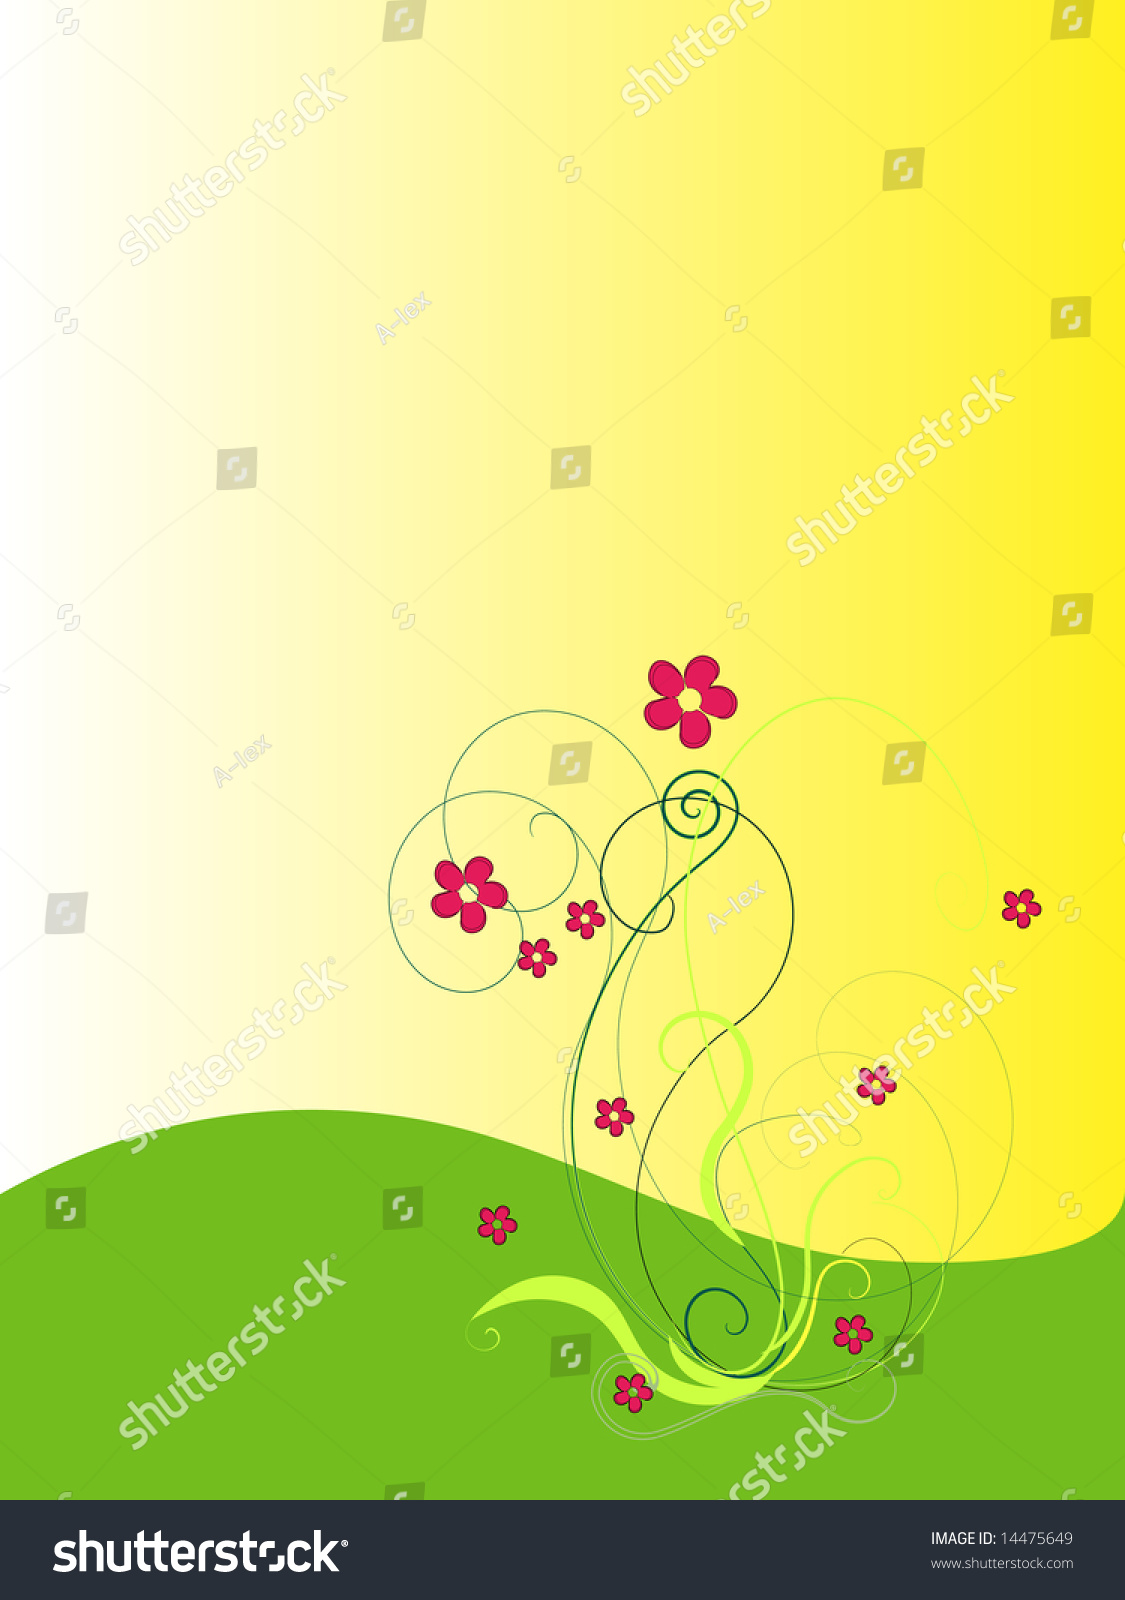 Background With Flowers, Illustration, Vector, Wave - 14475649